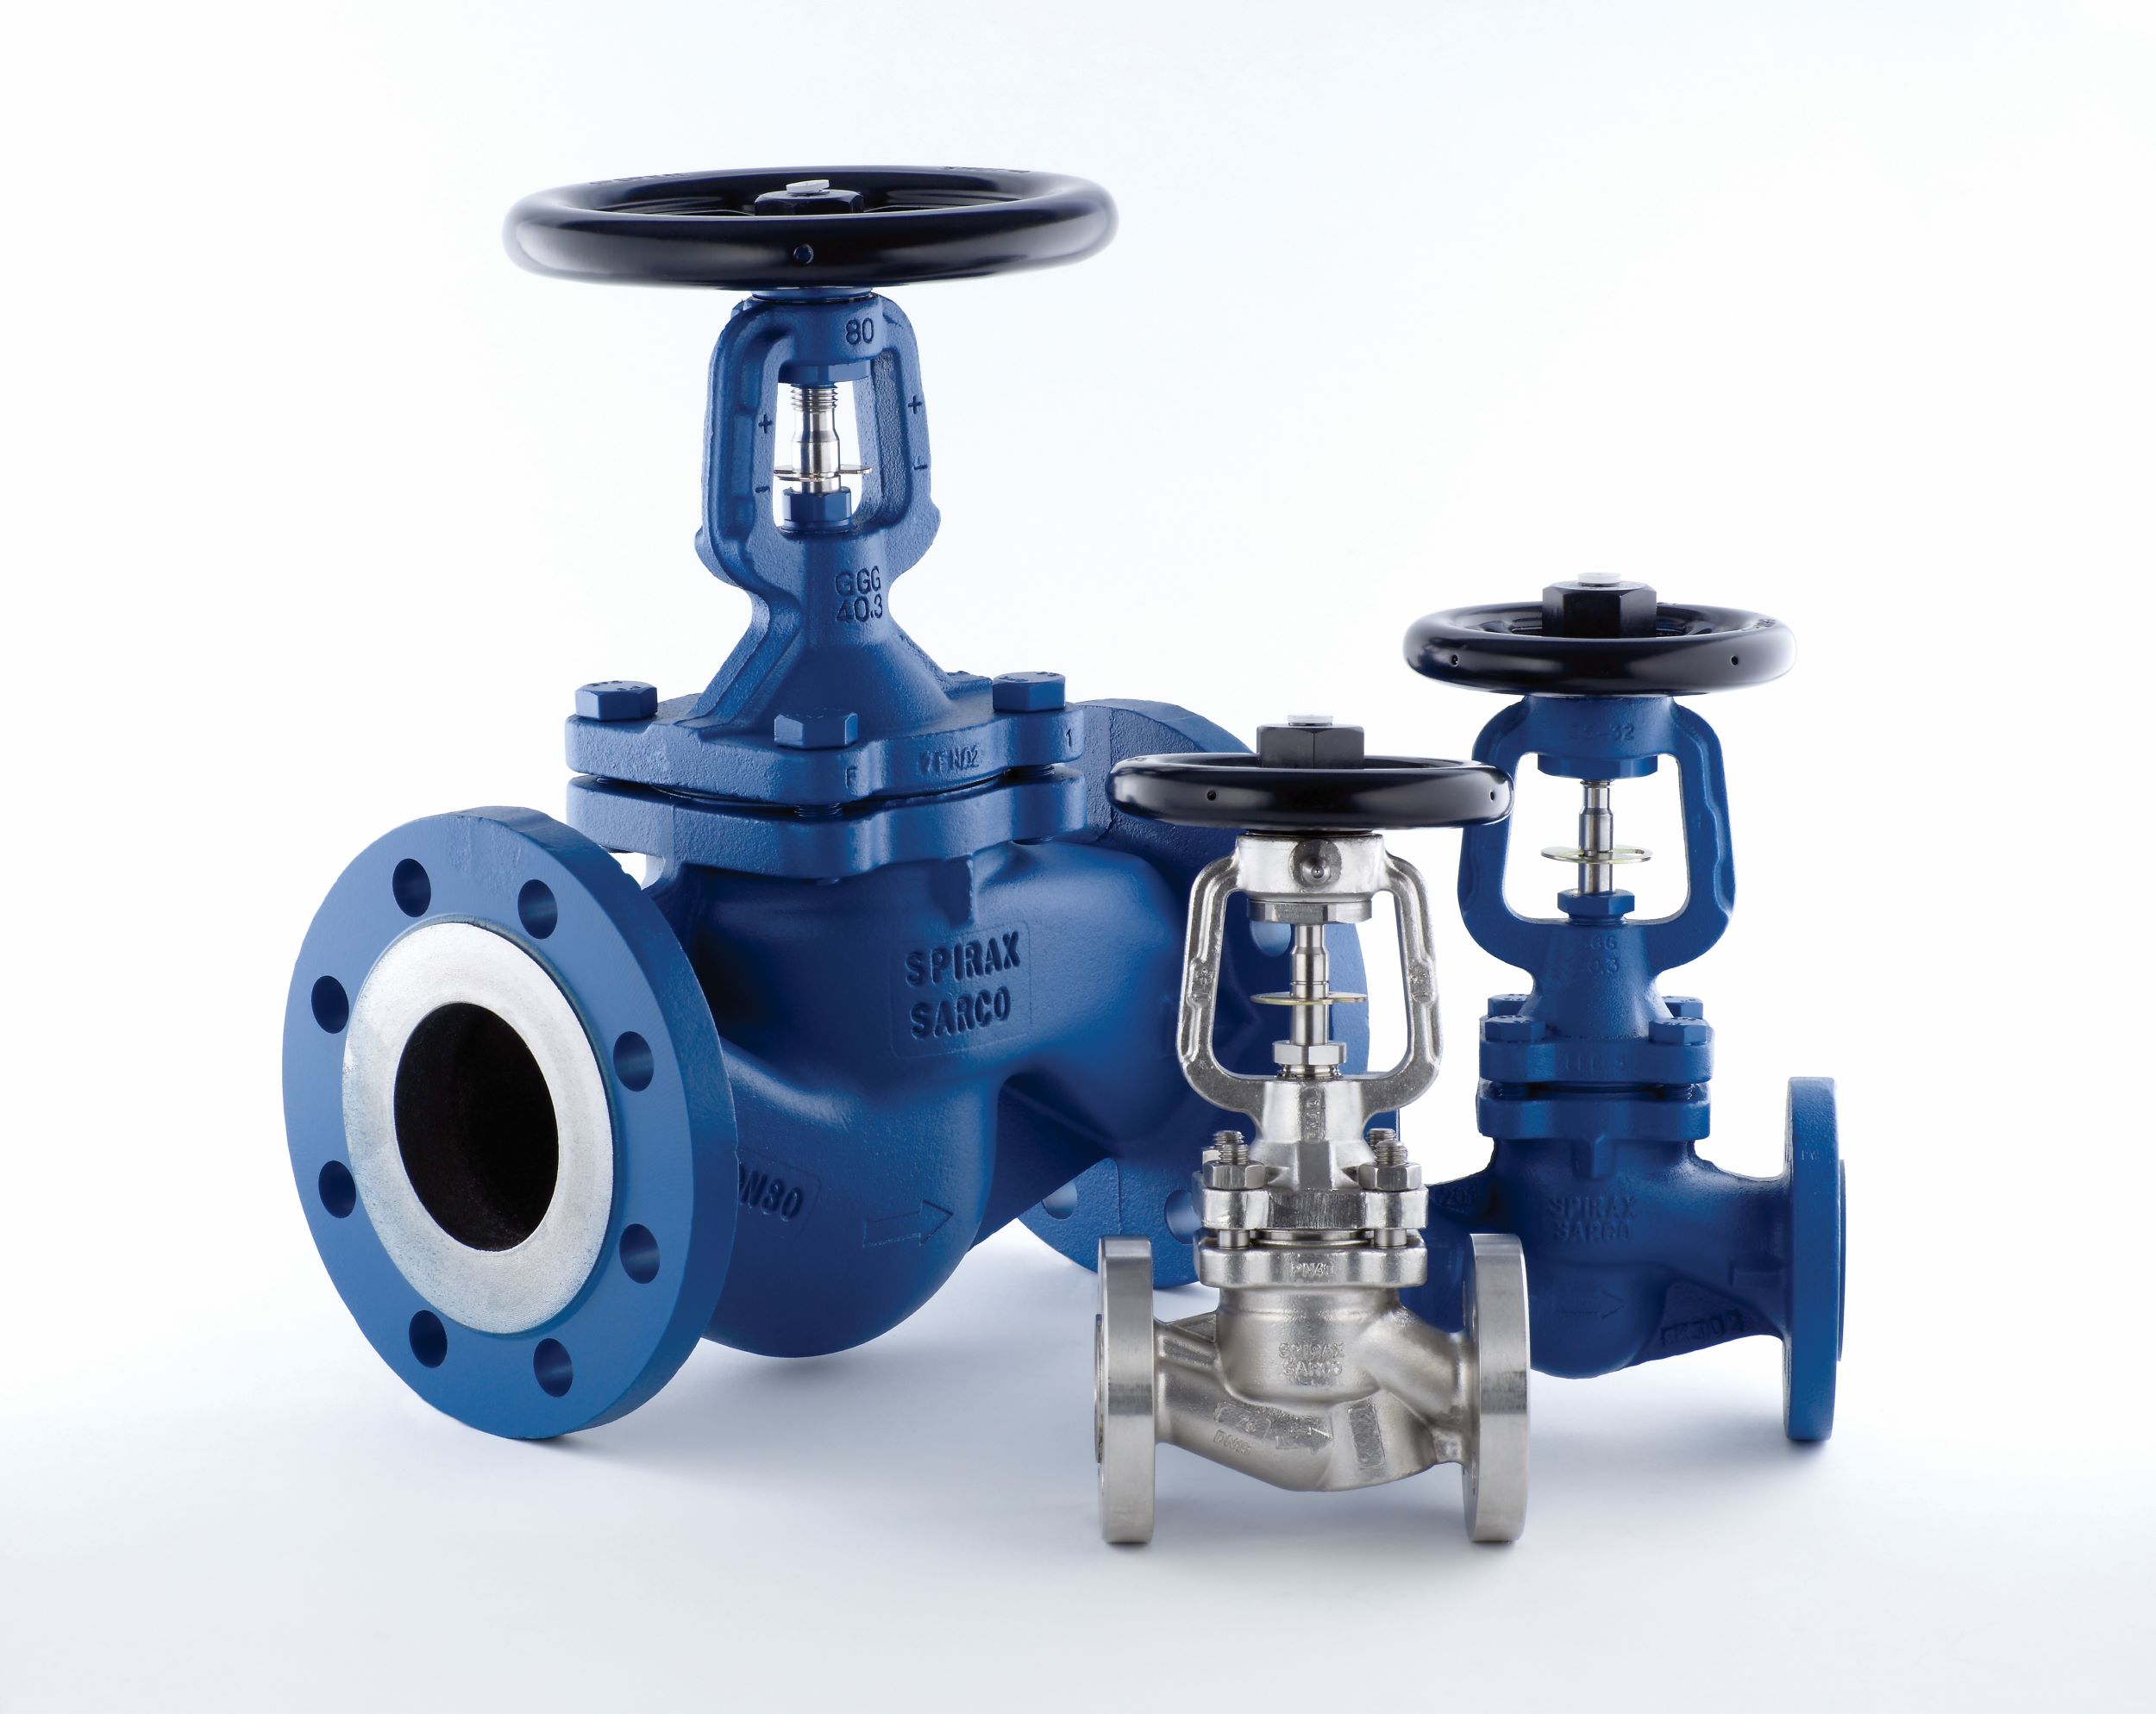 The BSA isolation valve will help oil, gas, petrochemical, pharmaceutical, food, and beverage customers save energy and ensure operator and plant safety.